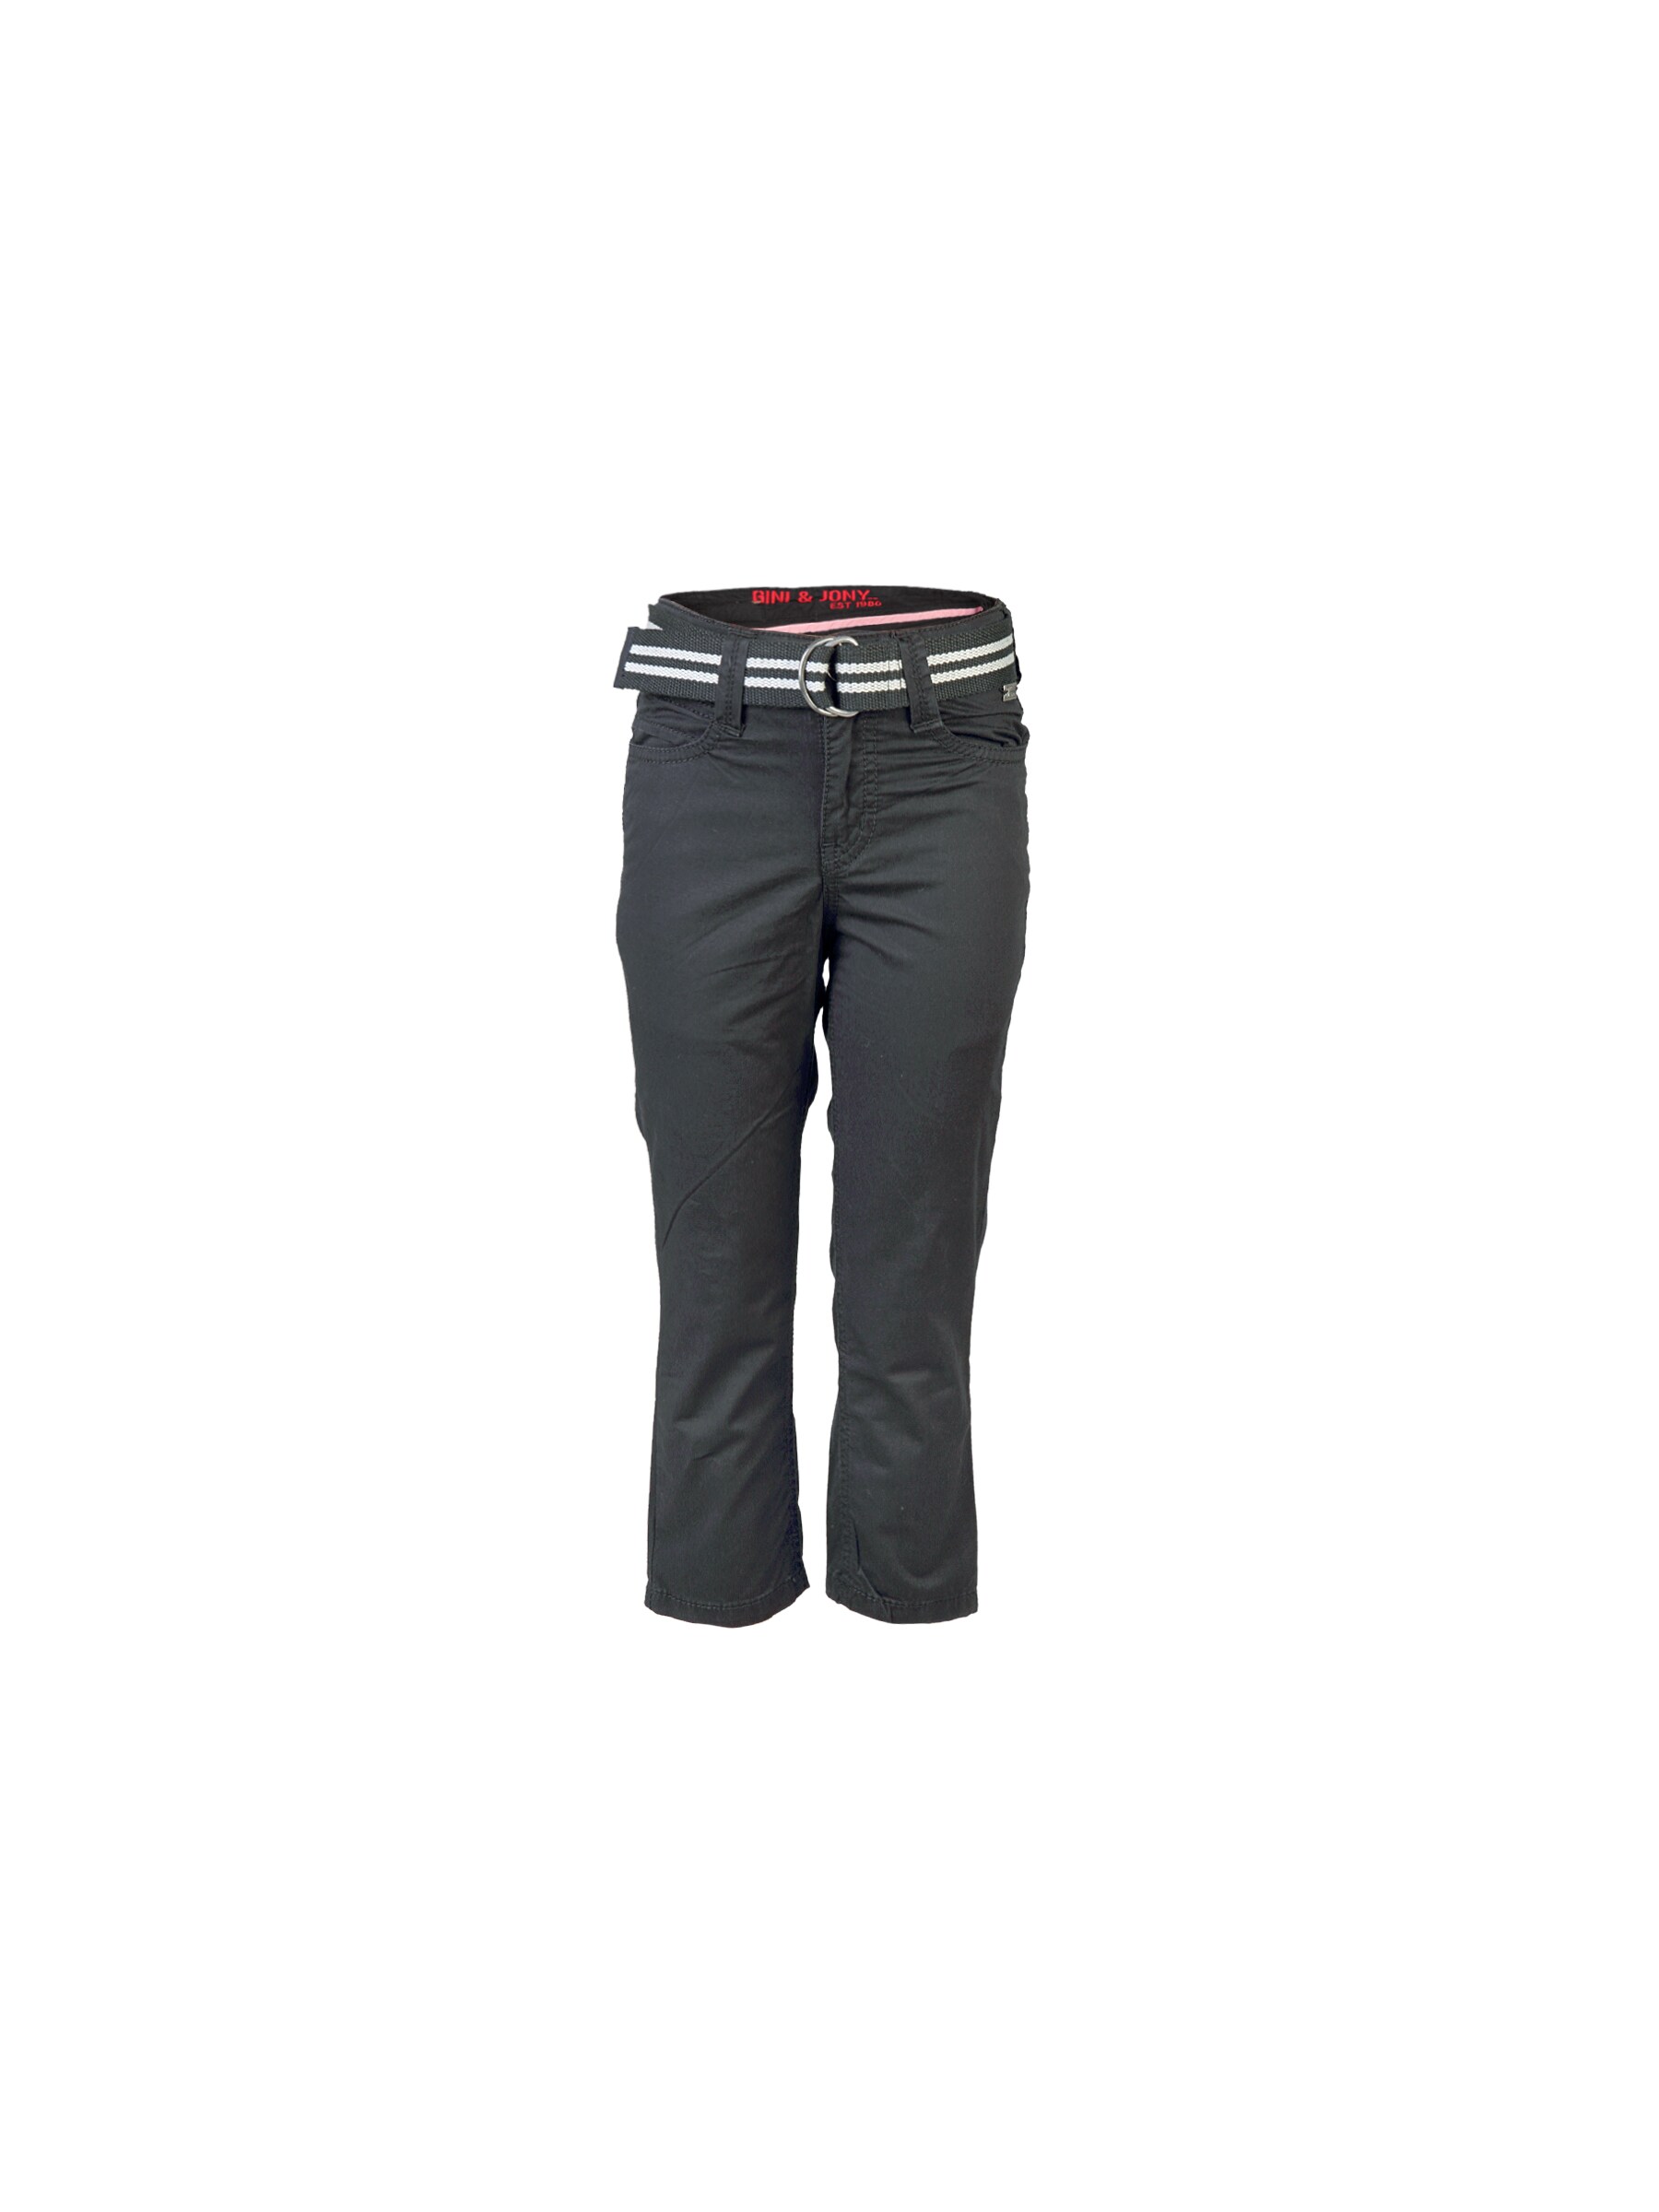 Gini and Jony Kids Solid Black Trousers